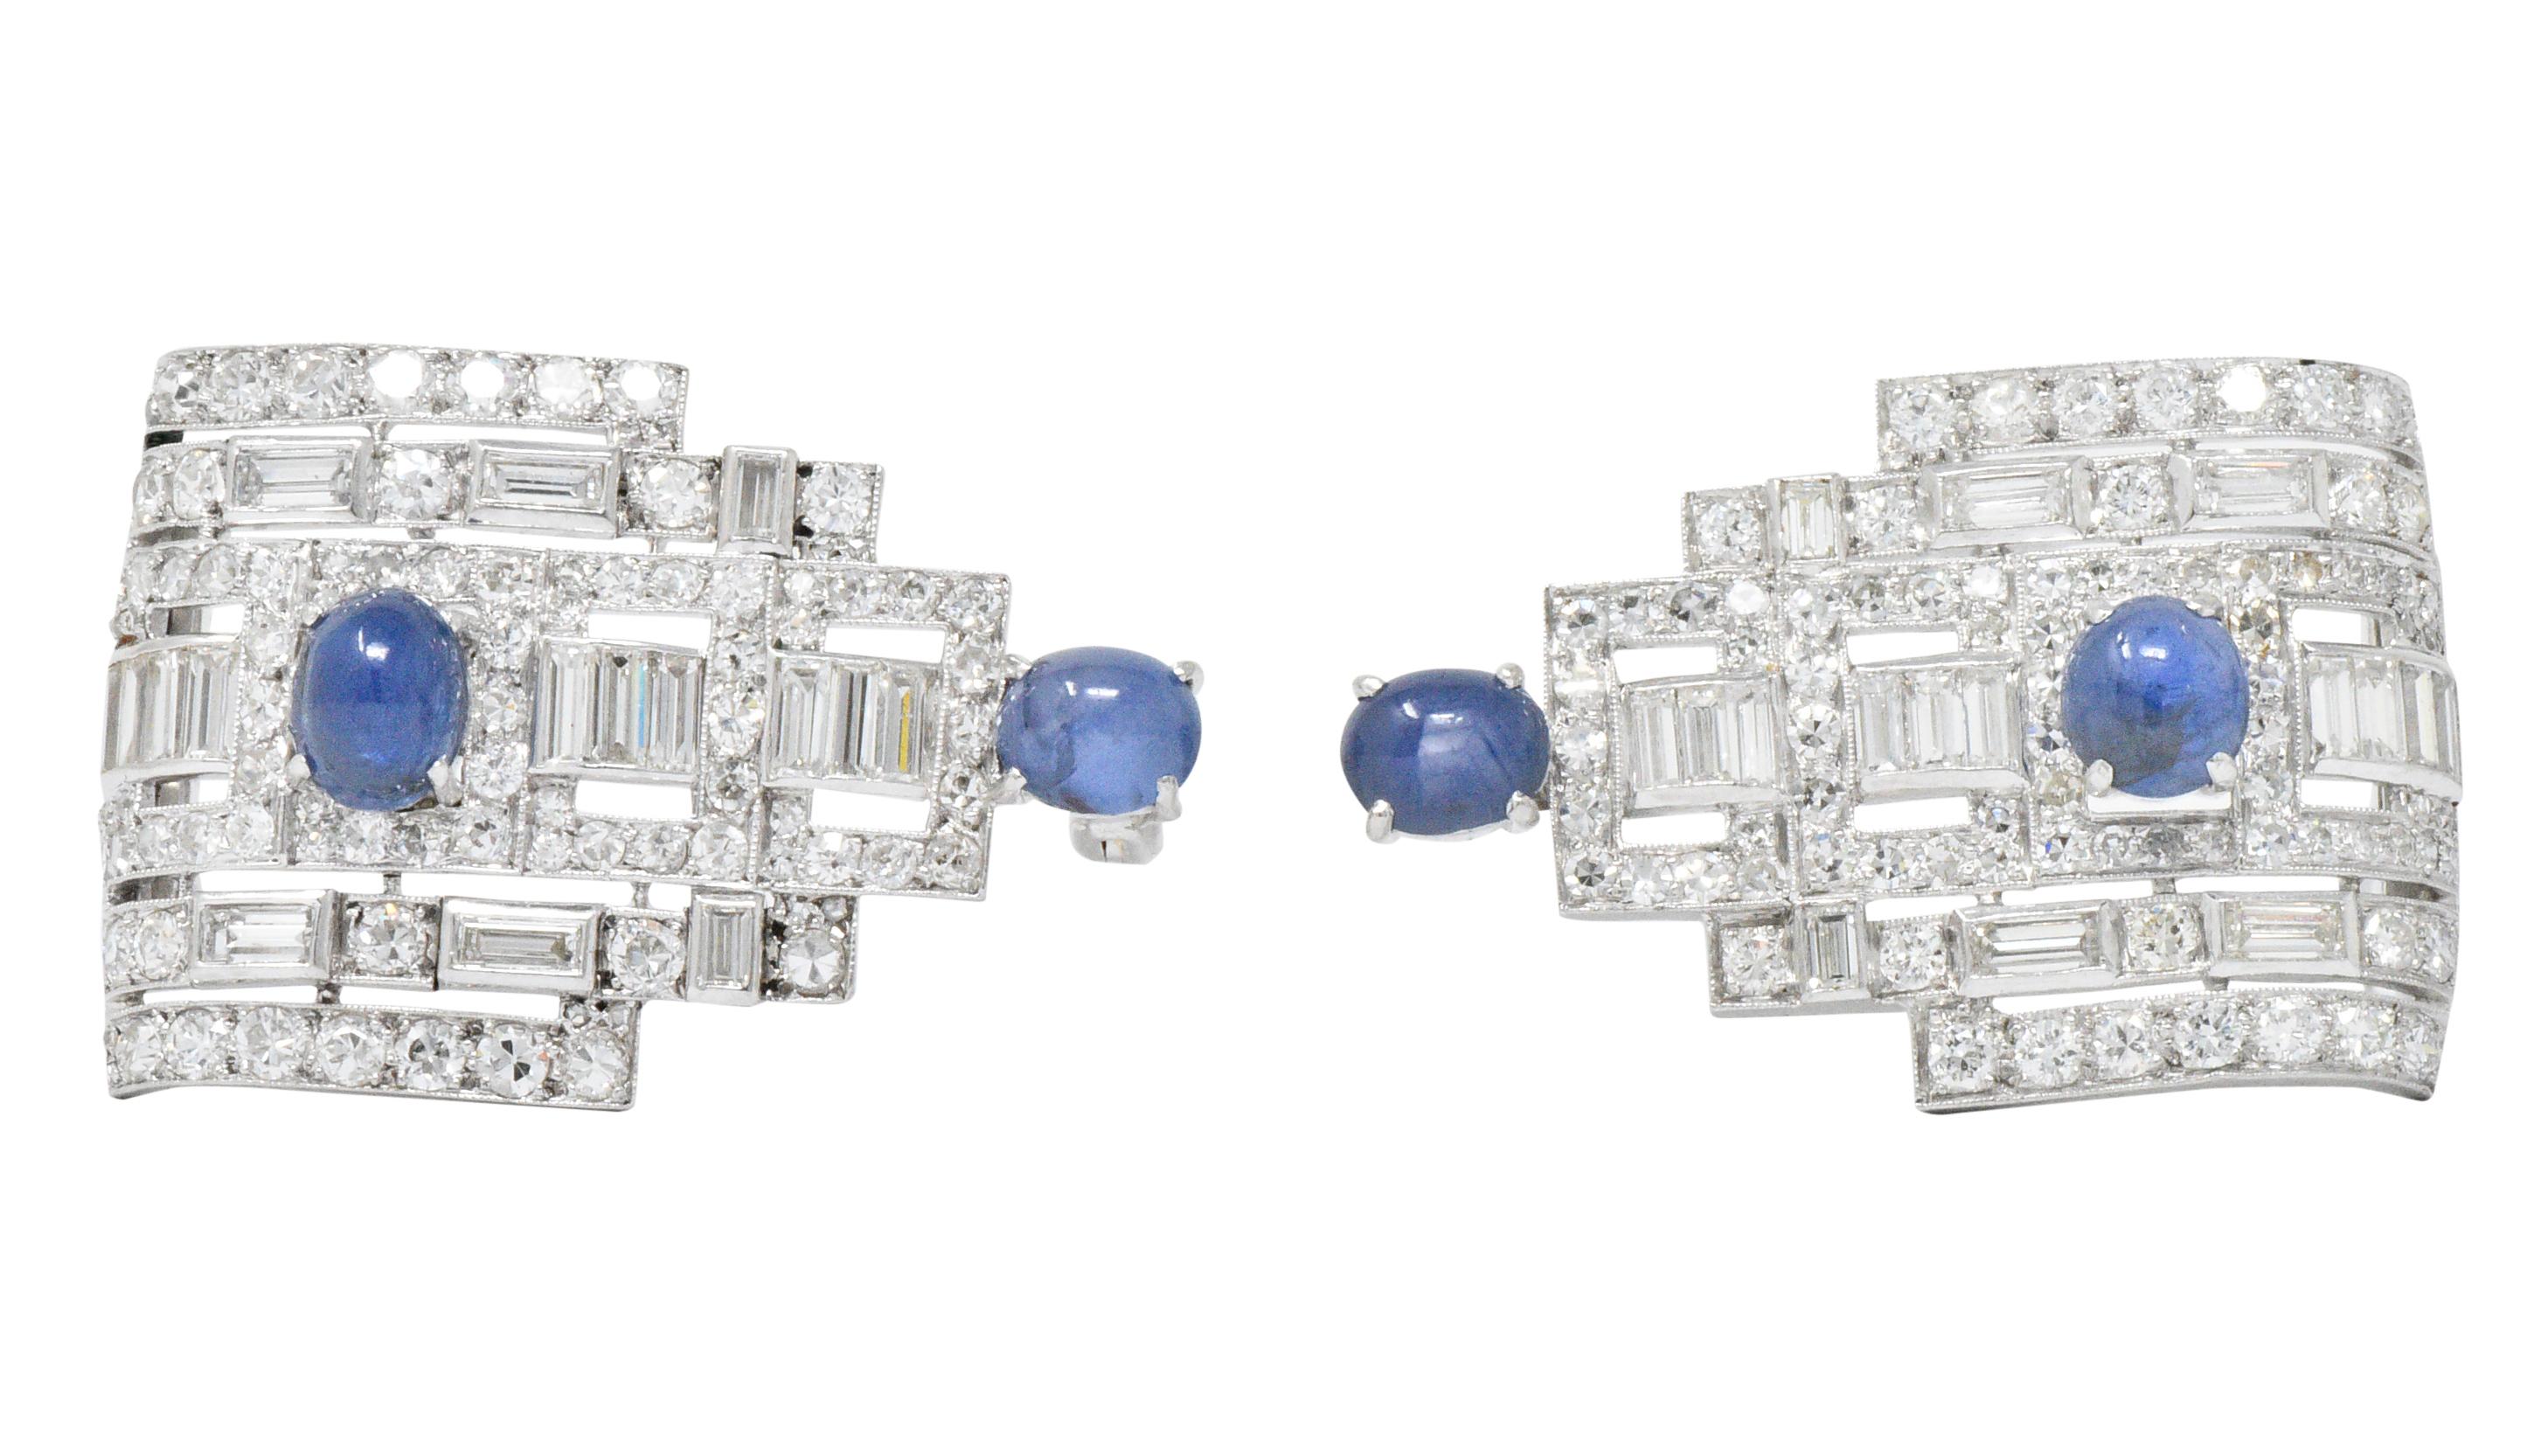 Two clips, each featuring 2 oval cabochon sapphires weighing approximately 5.95 carats total, bright medium blue

Set throughout with baguette, full and Swiss cut diamonds, weighing approximately 6.20 carats total, G/H color and VS to SI